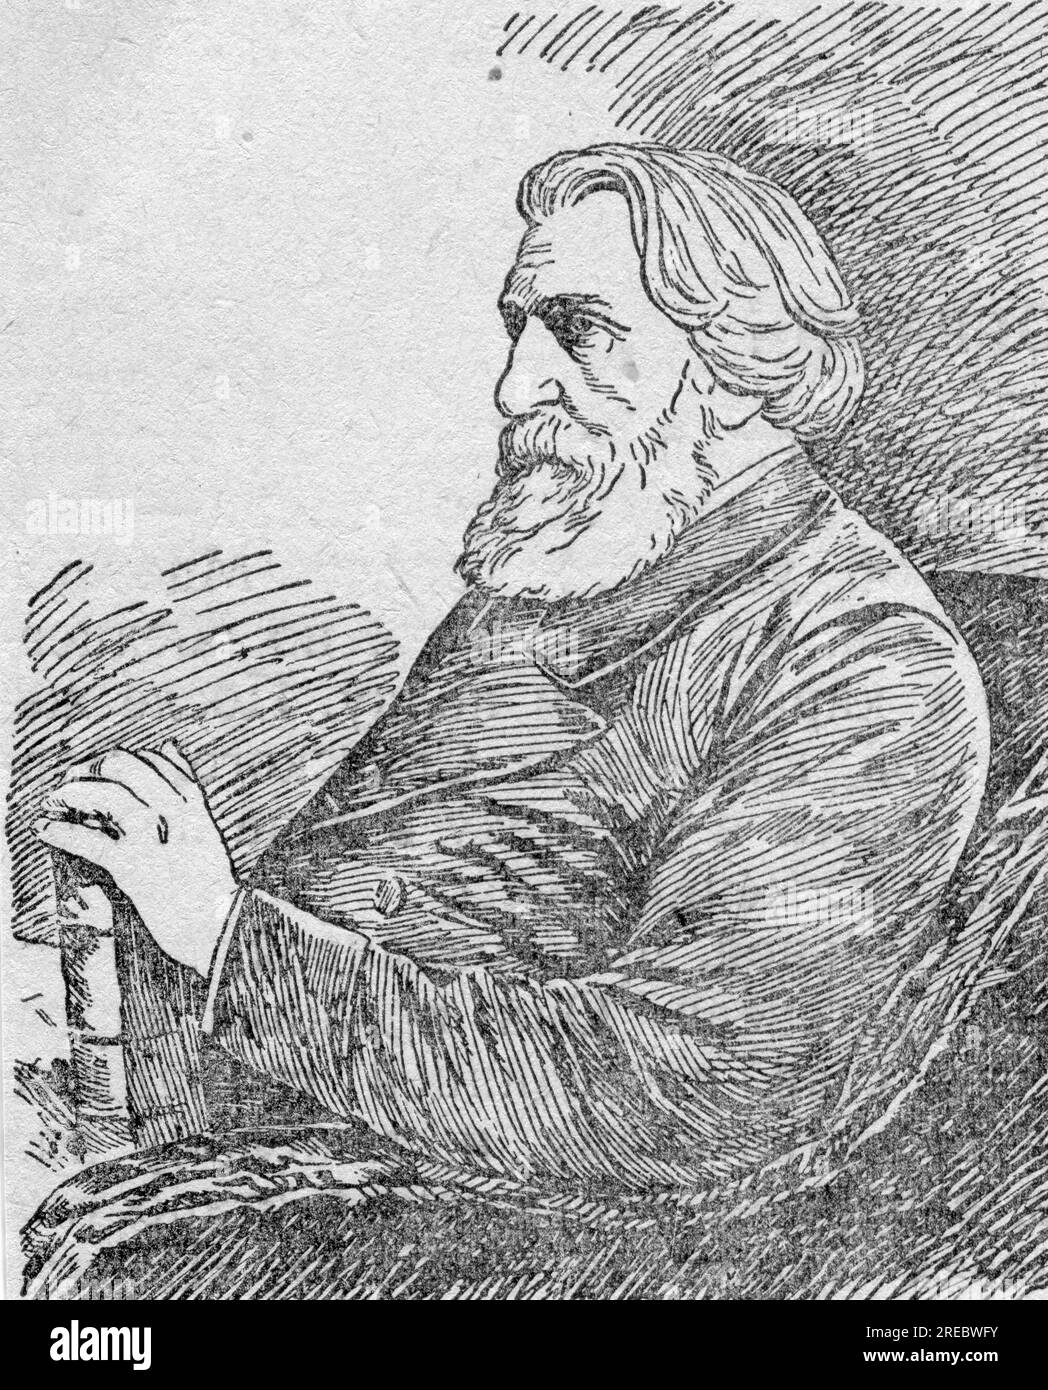 Turgenev, Ivan Sergeyevich, 9.11.1818 - 3.9.1883, Russian writer, woodcut of W. G. Perova, ADDITIONAL-RIGHTS-CLEARANCE-INFO-NOT-AVAILABLE Stock Photo